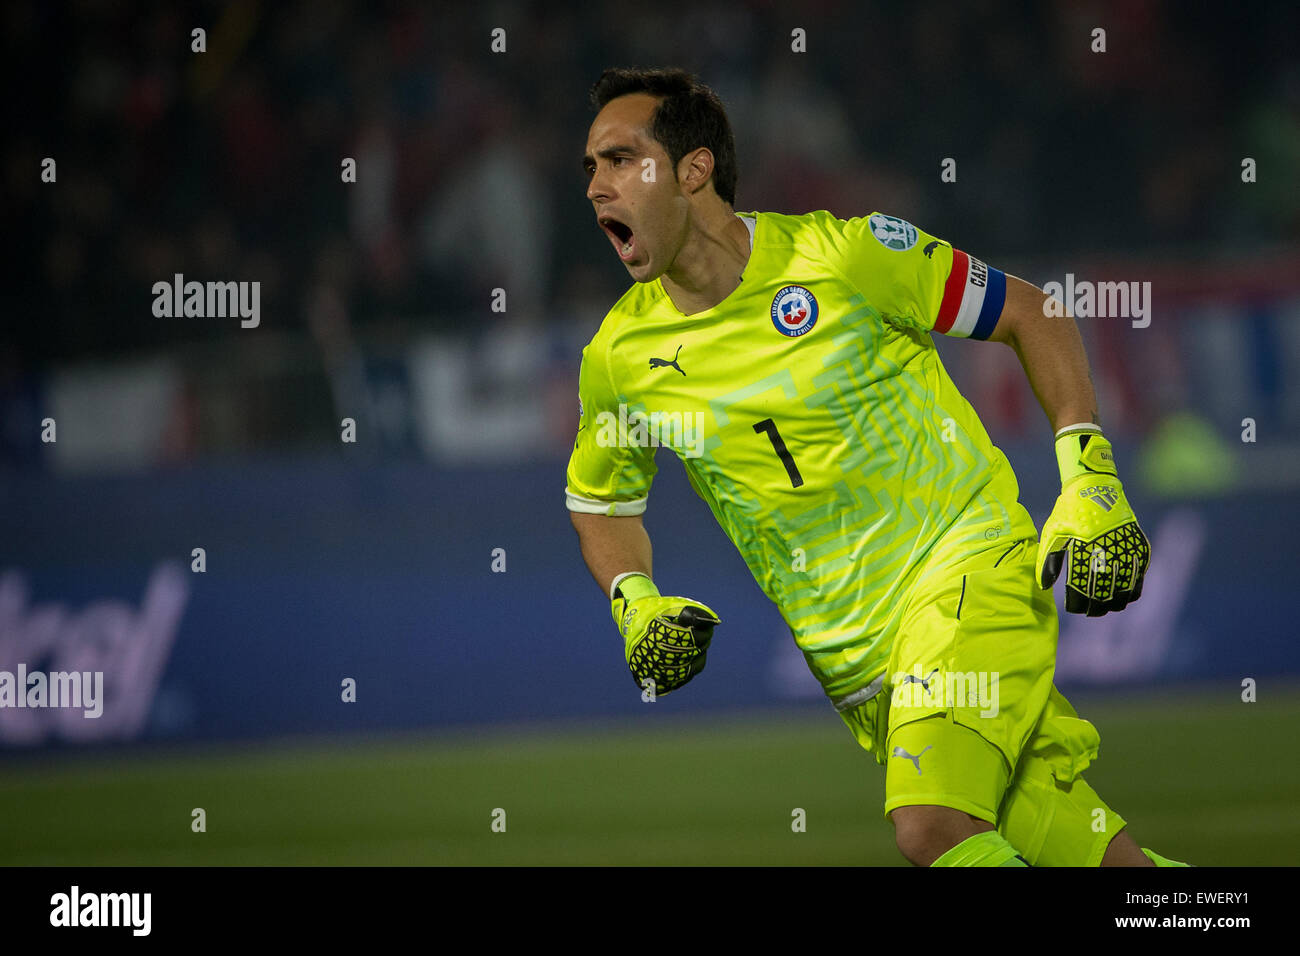 Santiago, Chile. 24th June, 2015. Chile's goalkeeper Claudio Bravo celebrates the goal against Uruguay during their quarterfinal at 2015 Copa America in Santiago, Chile, on June 24, 2015. Chile won 1-0. Credit:  Pedro Mera/Xinhua/Alamy Live News Stock Photo